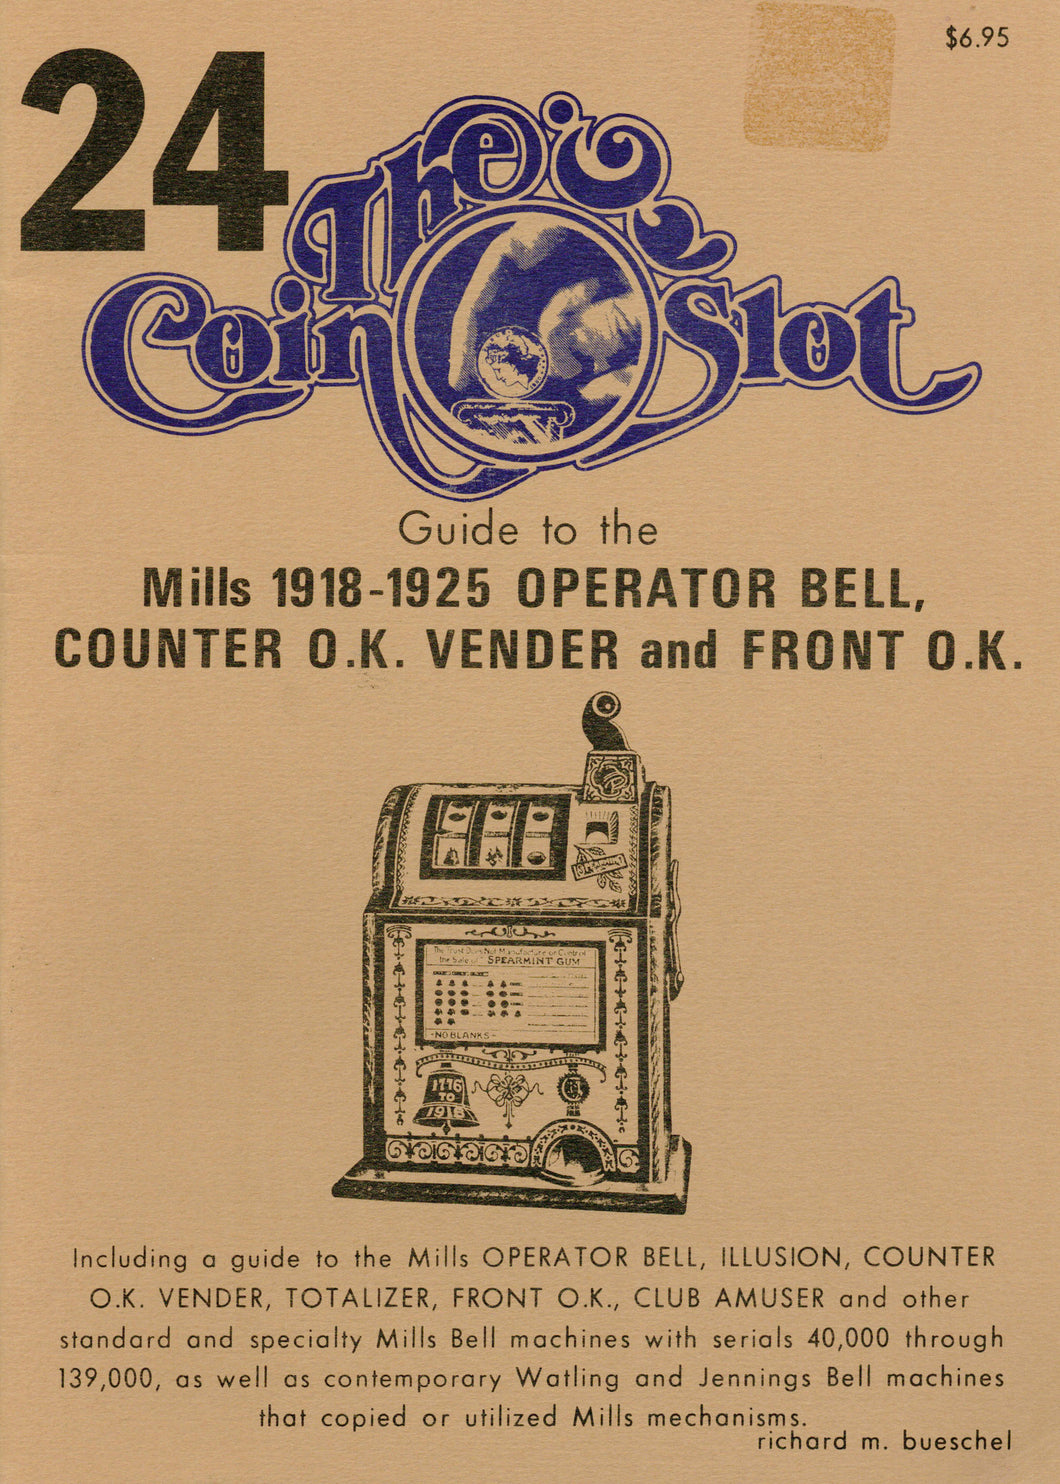 Coin Slot #24. Guide to the Mills 1918-1925 Operator Bell, Counter O.K. Vendor and Front O.K.